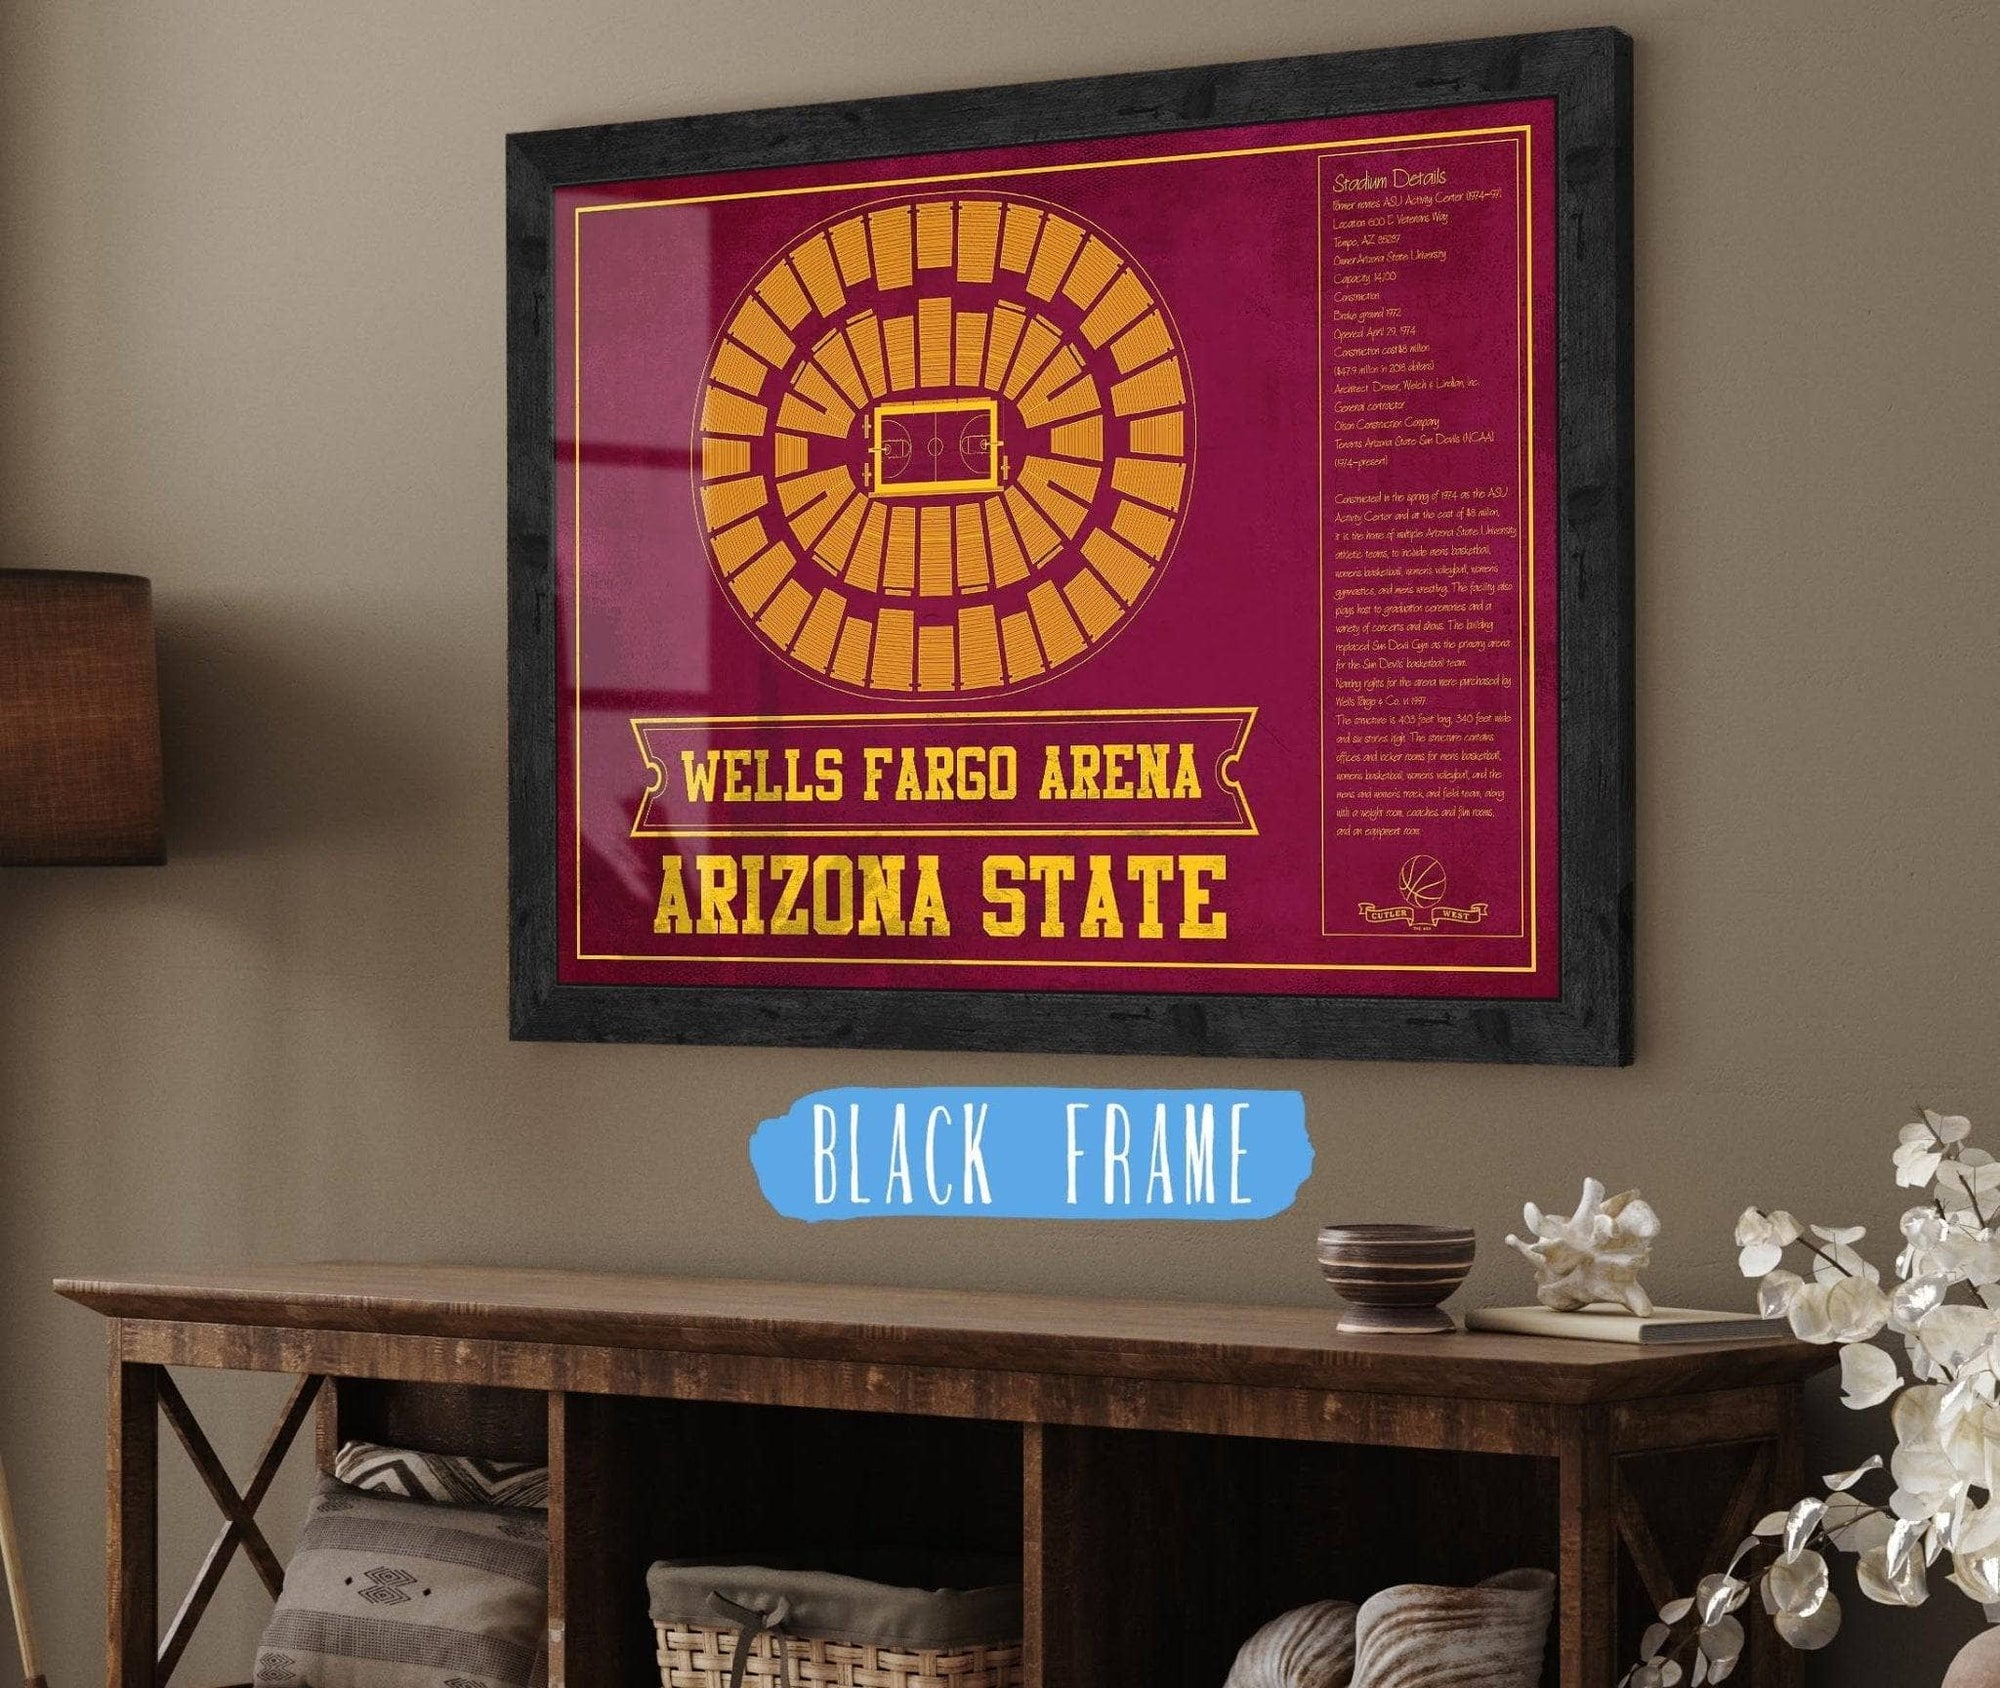 Cutler West Basketball Collection 14" x 11" / Black Frame Arizona State University Wells Fargo Arena Teamcolor Seating Chart 933350228_82569